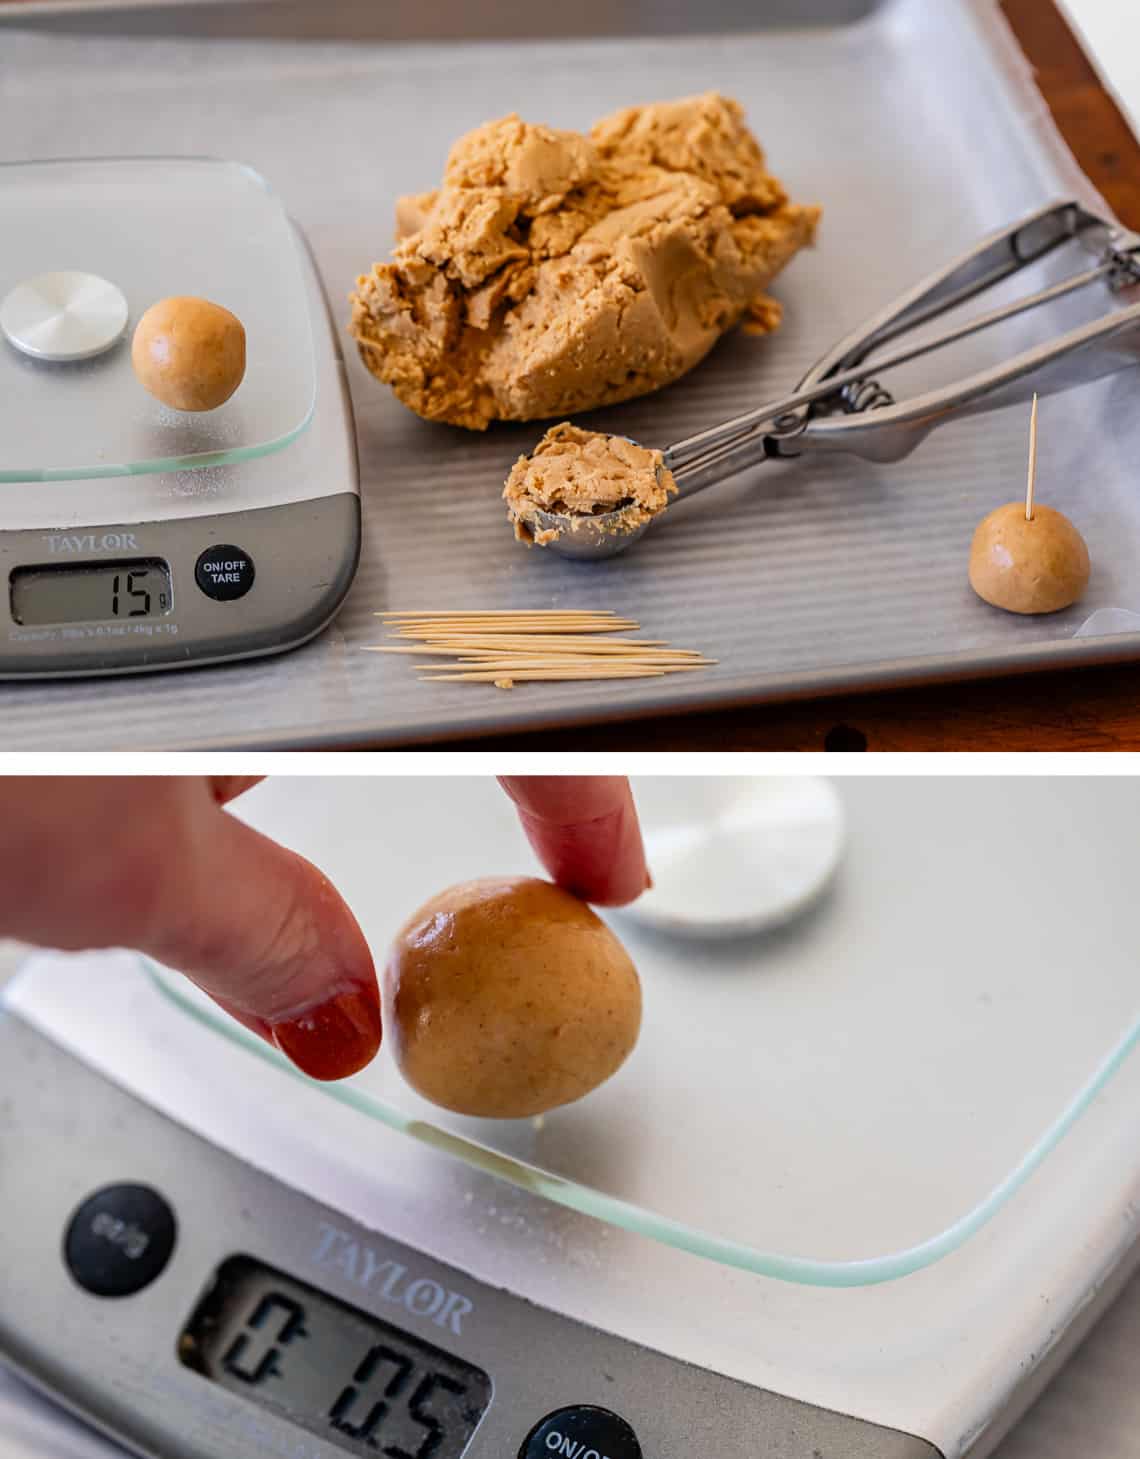 top cookie scoop to start forming dough into balls, bottom dough ball on scale at about 1/2 ounce.